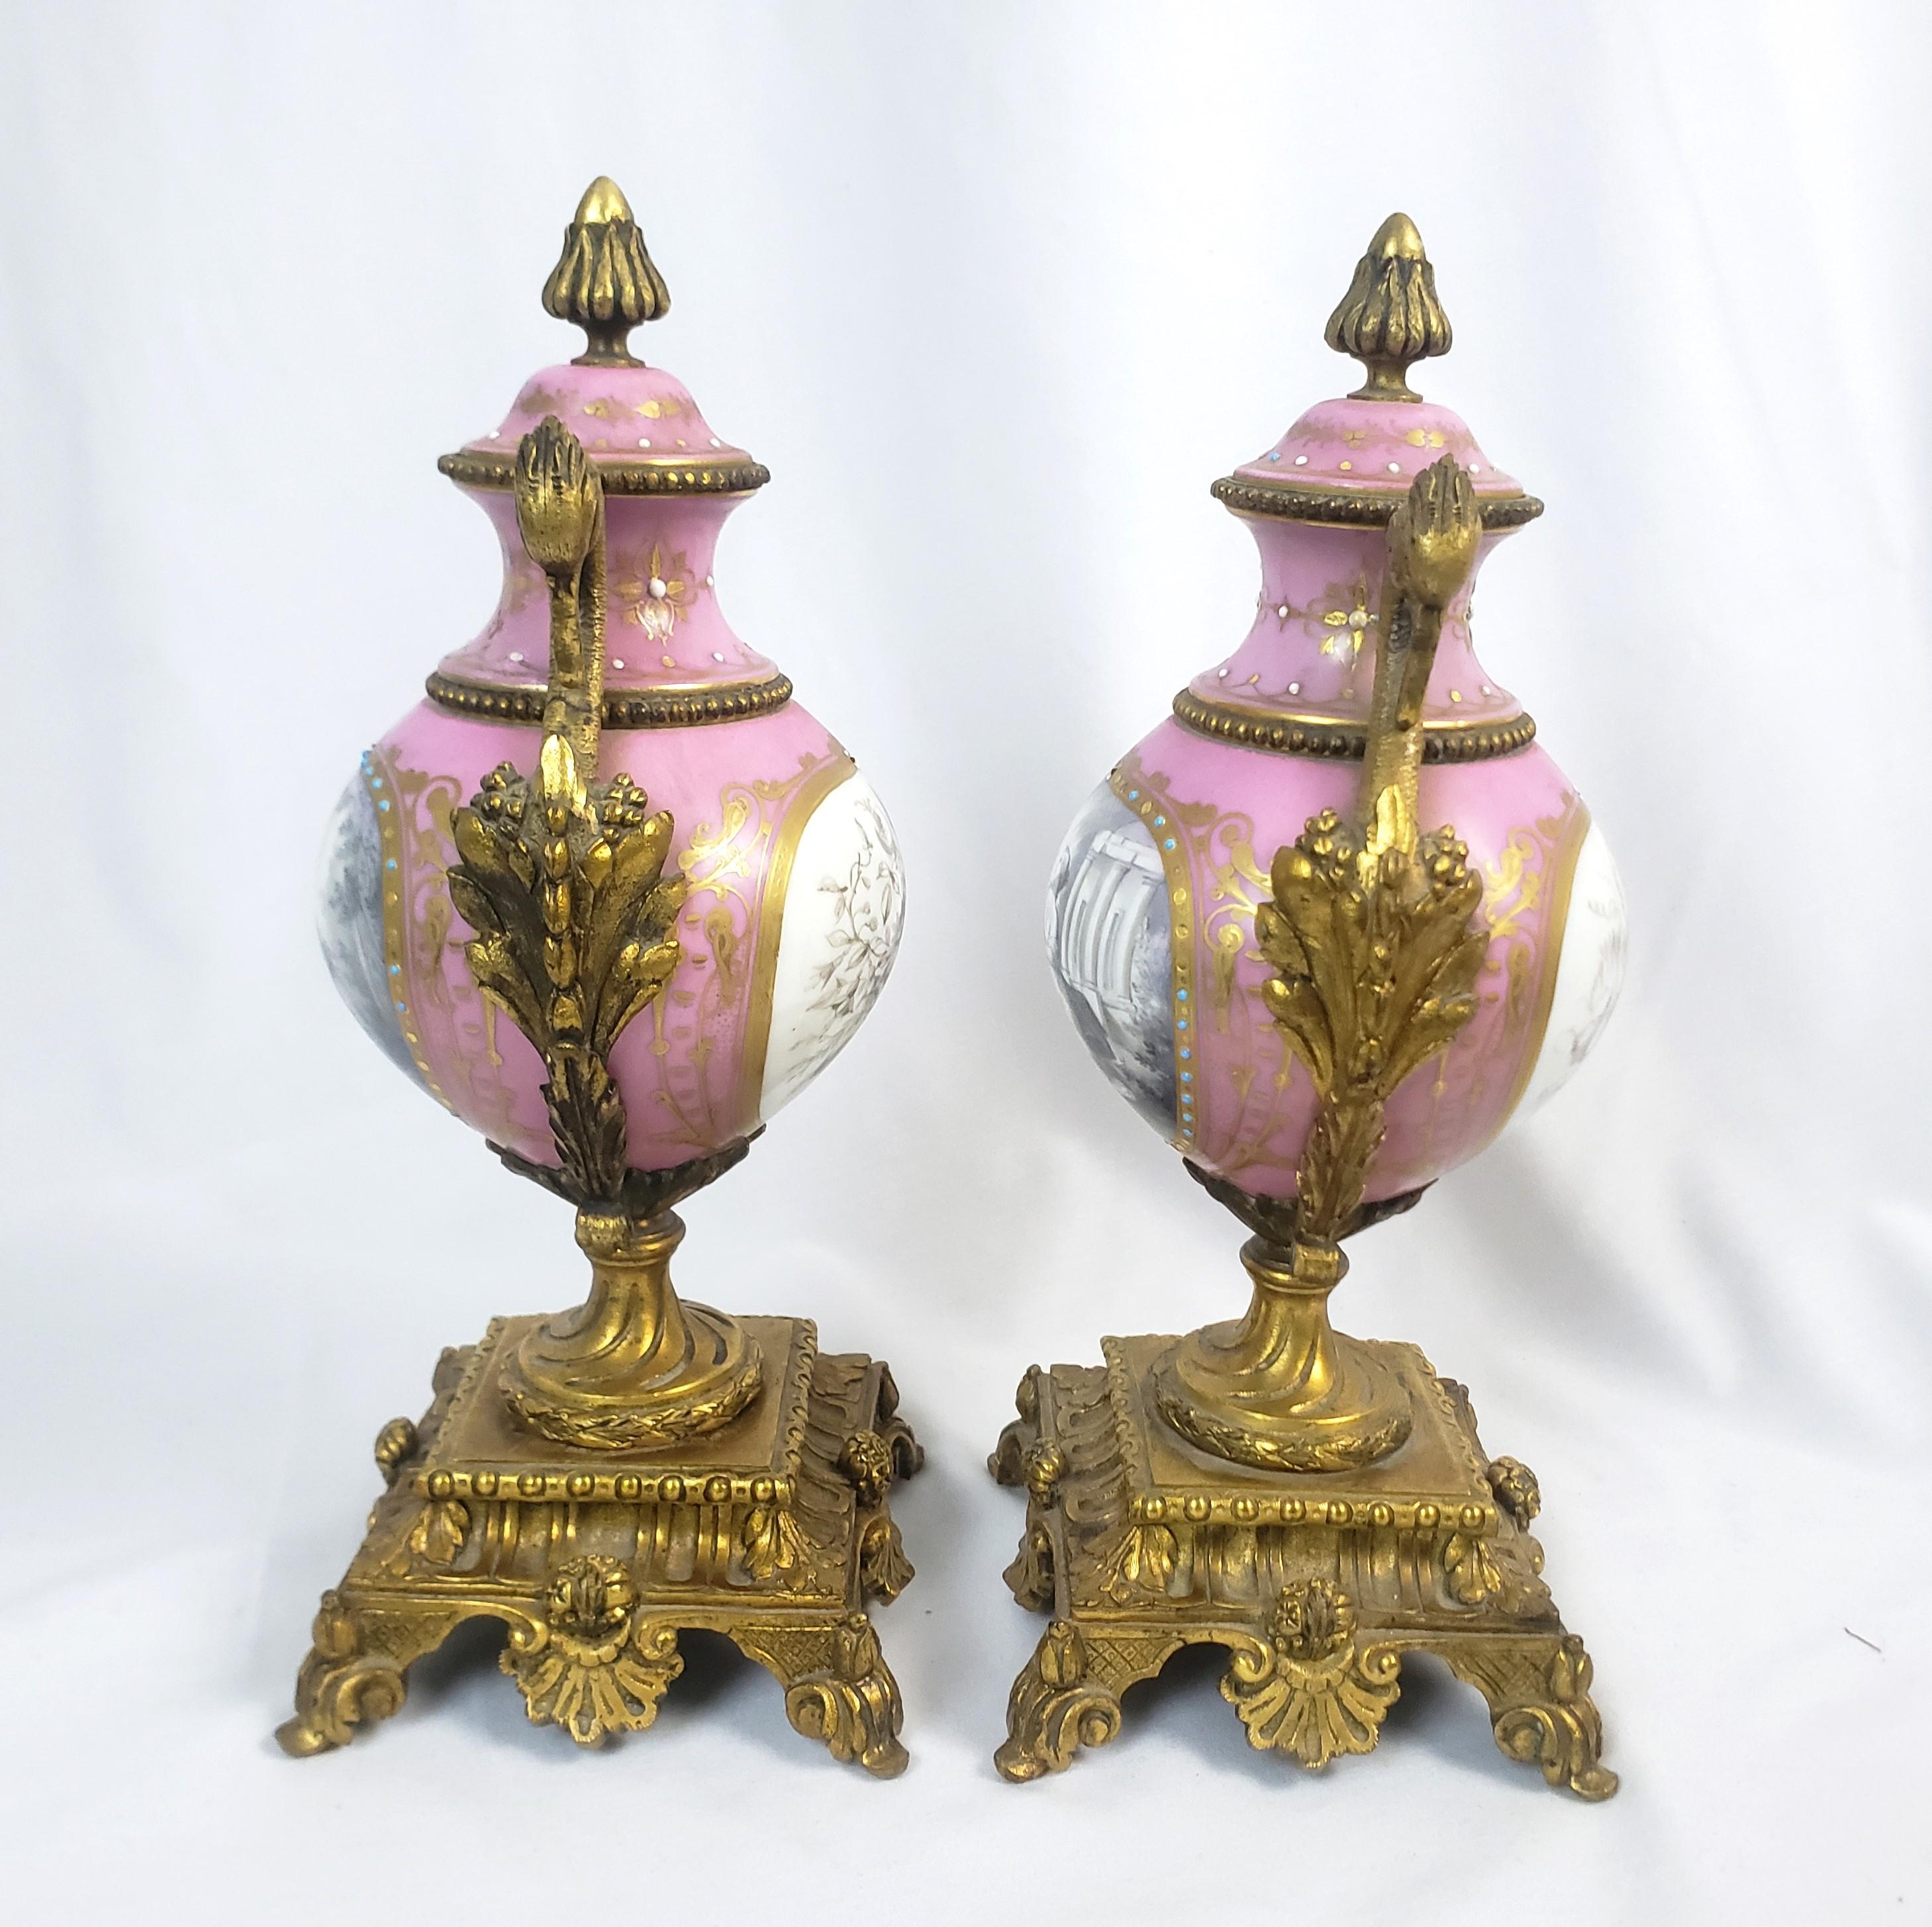 Pair of Antique Sevres Styled Porcelain & Ornate Gilt Bronze Garnitures In Good Condition For Sale In Hamilton, Ontario